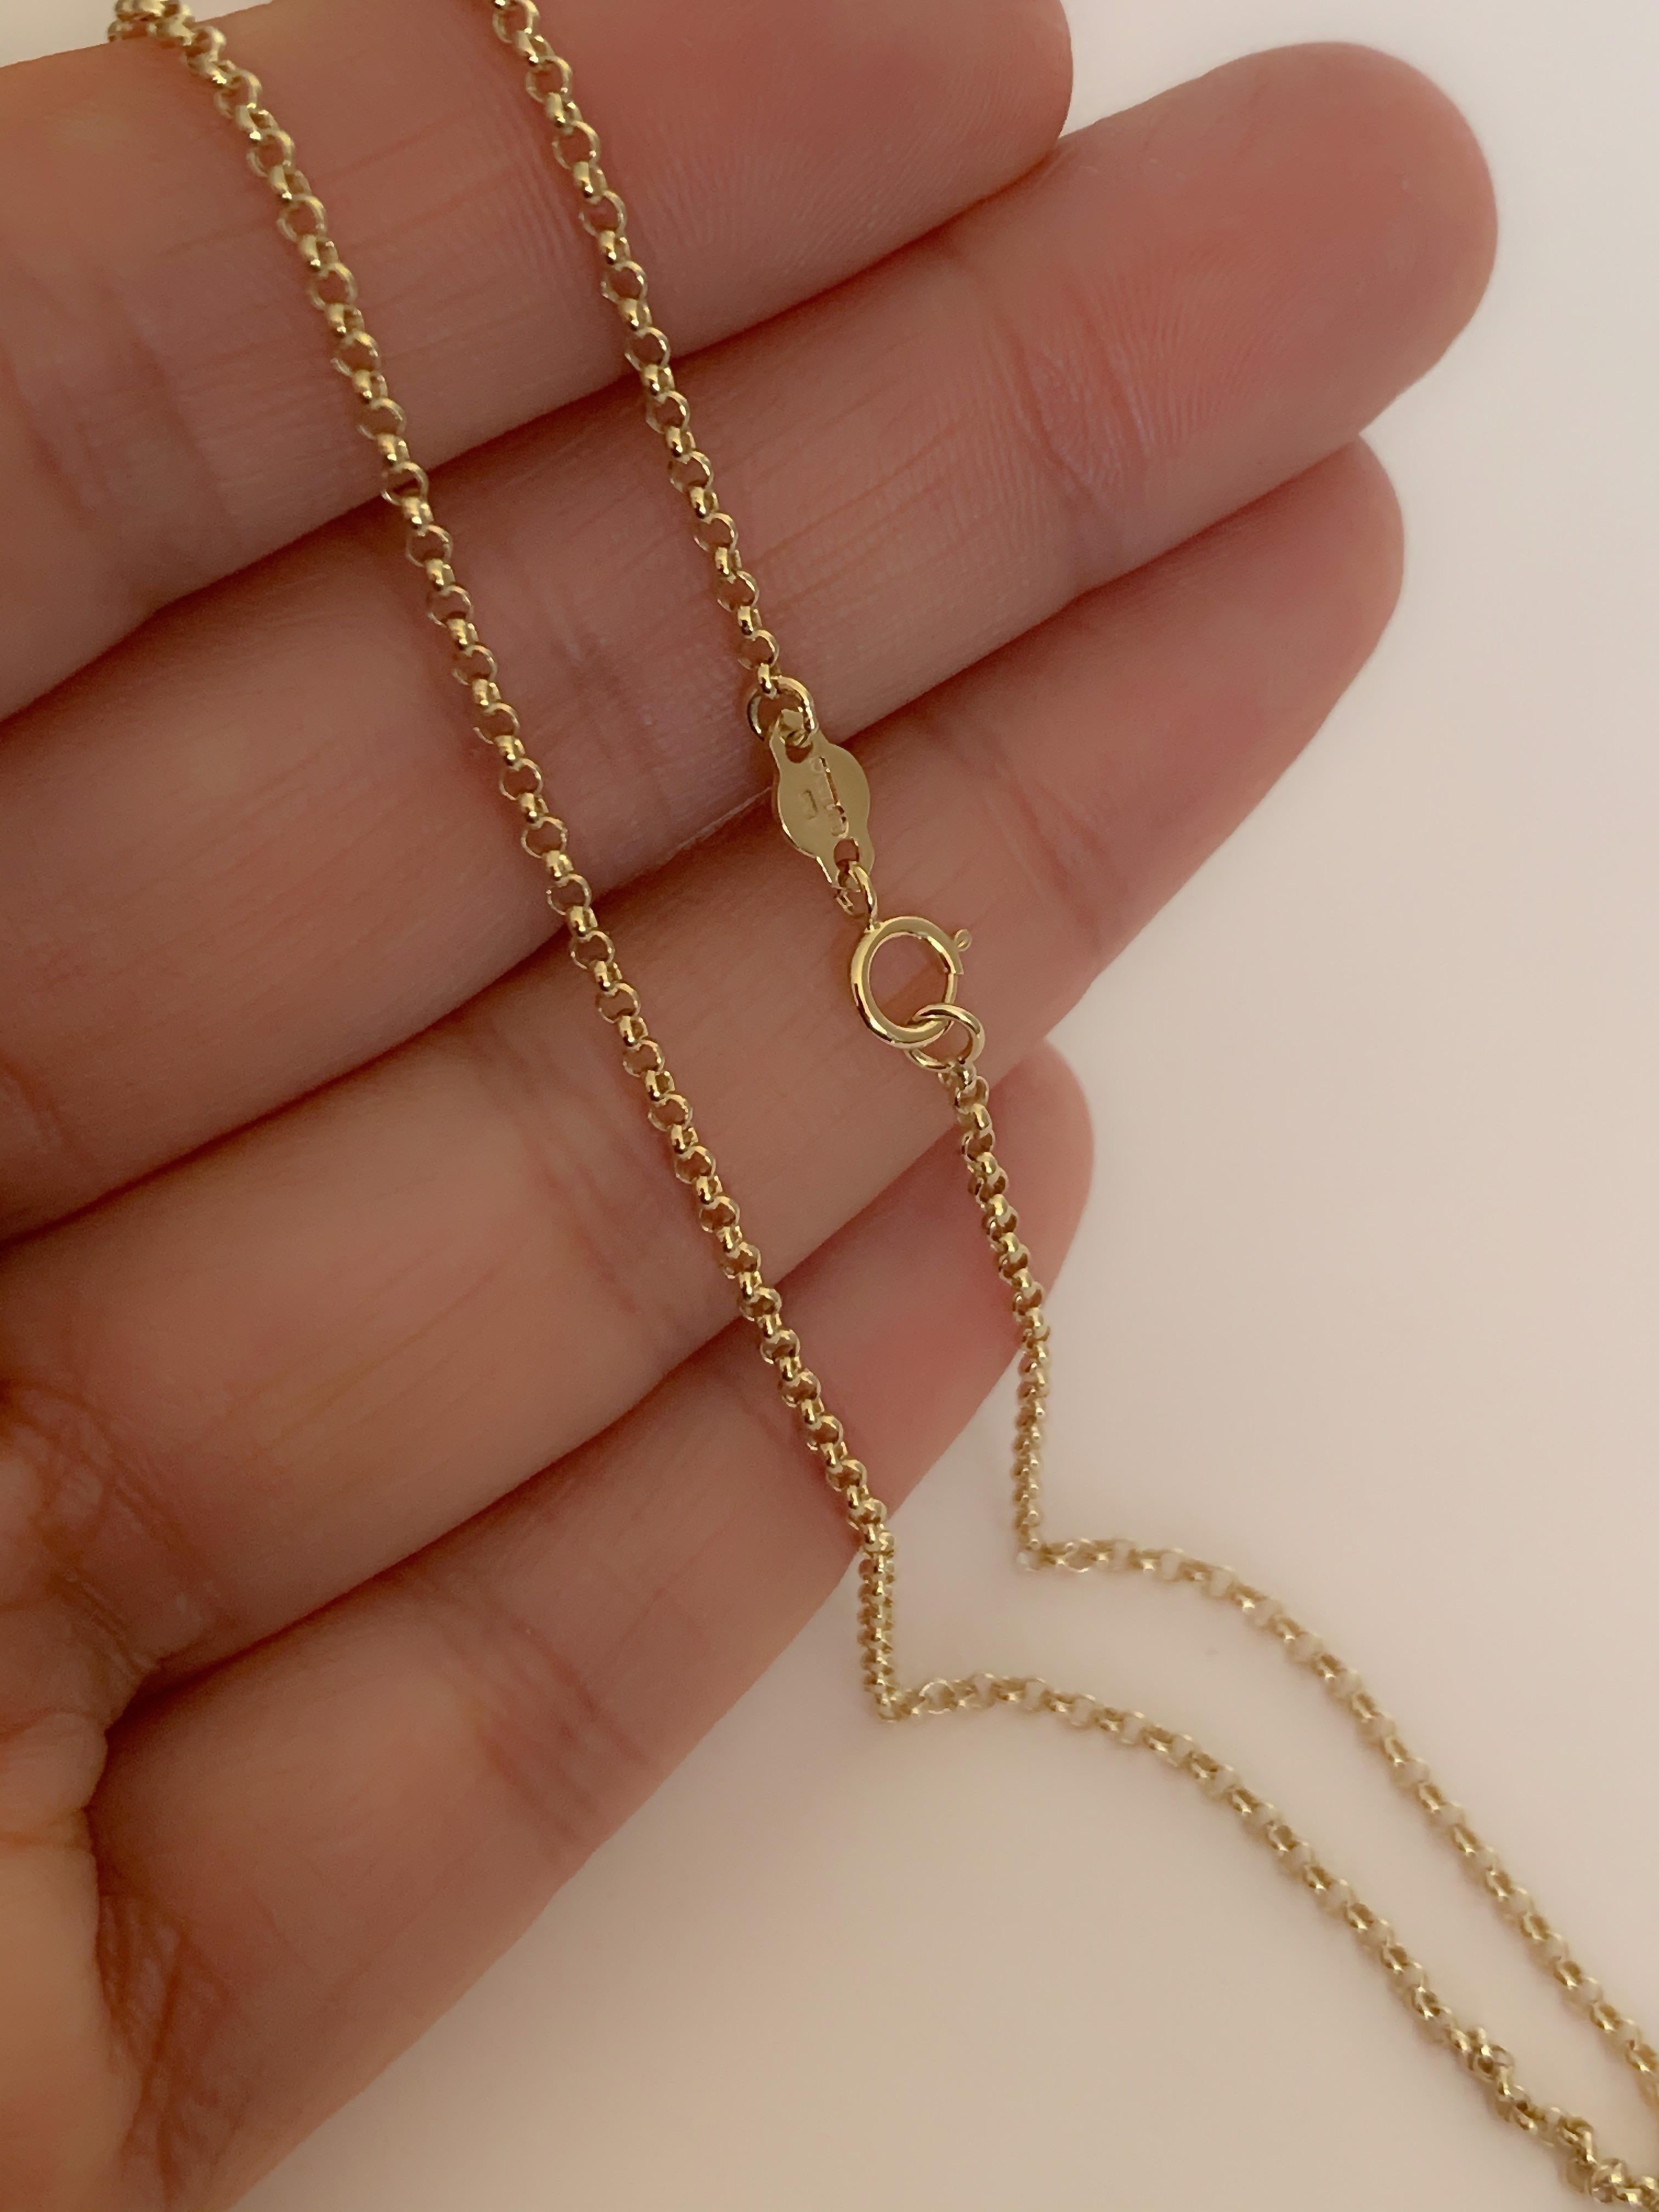 18 Karat Solid Yellow Gold Rollo Belcher Chain Necklace For Sale 2